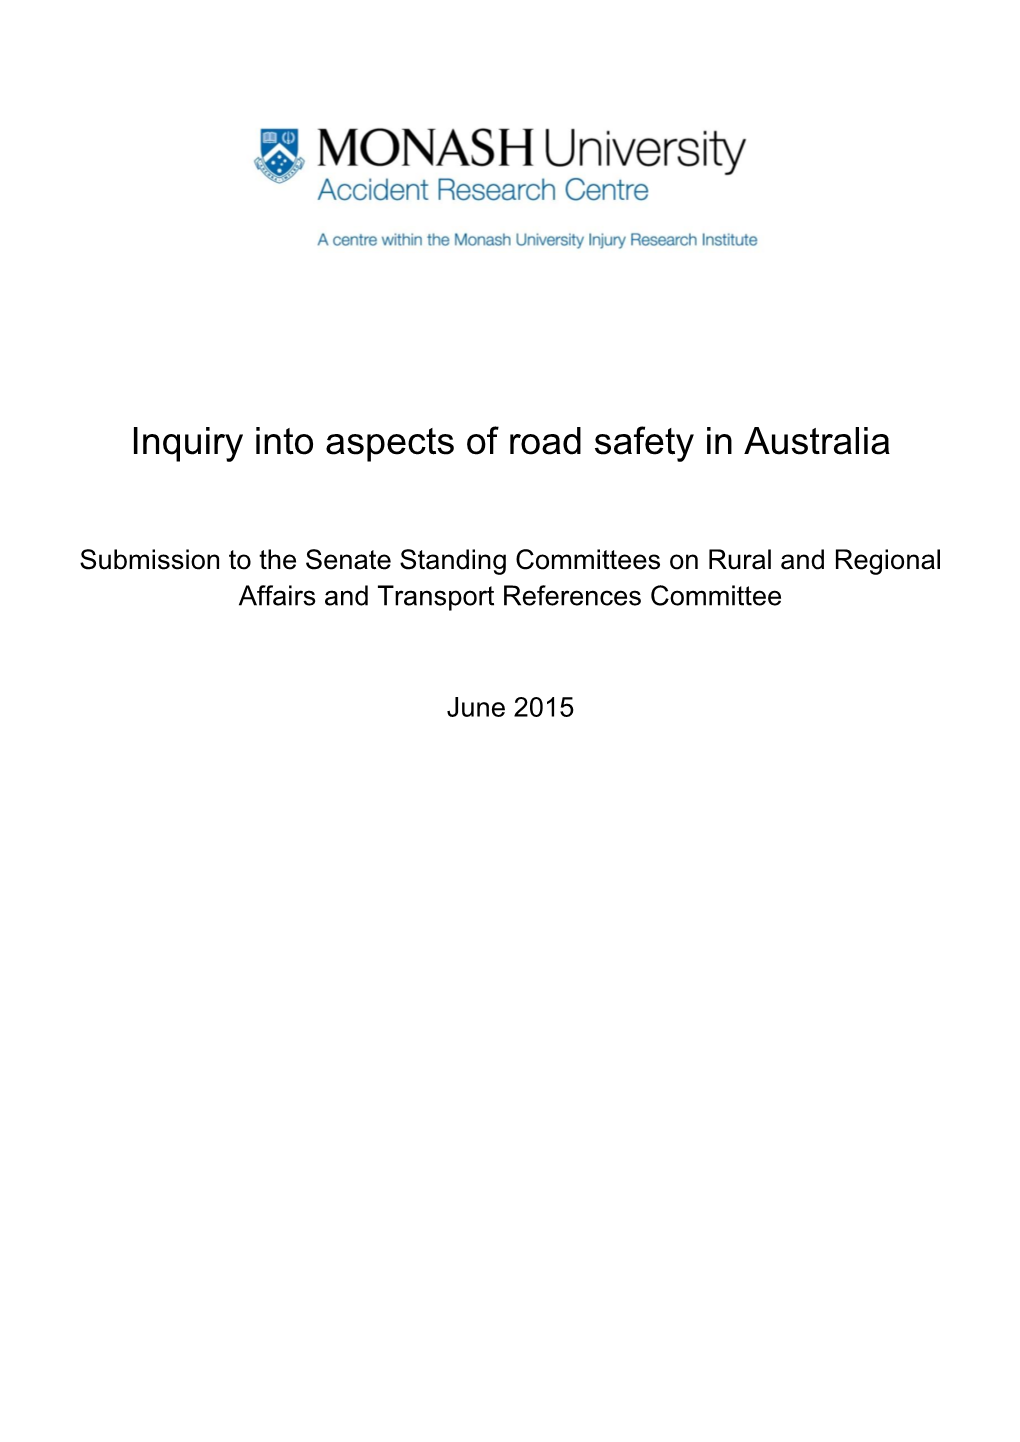 Inquiry Into Aspects of Road Safety in Australia